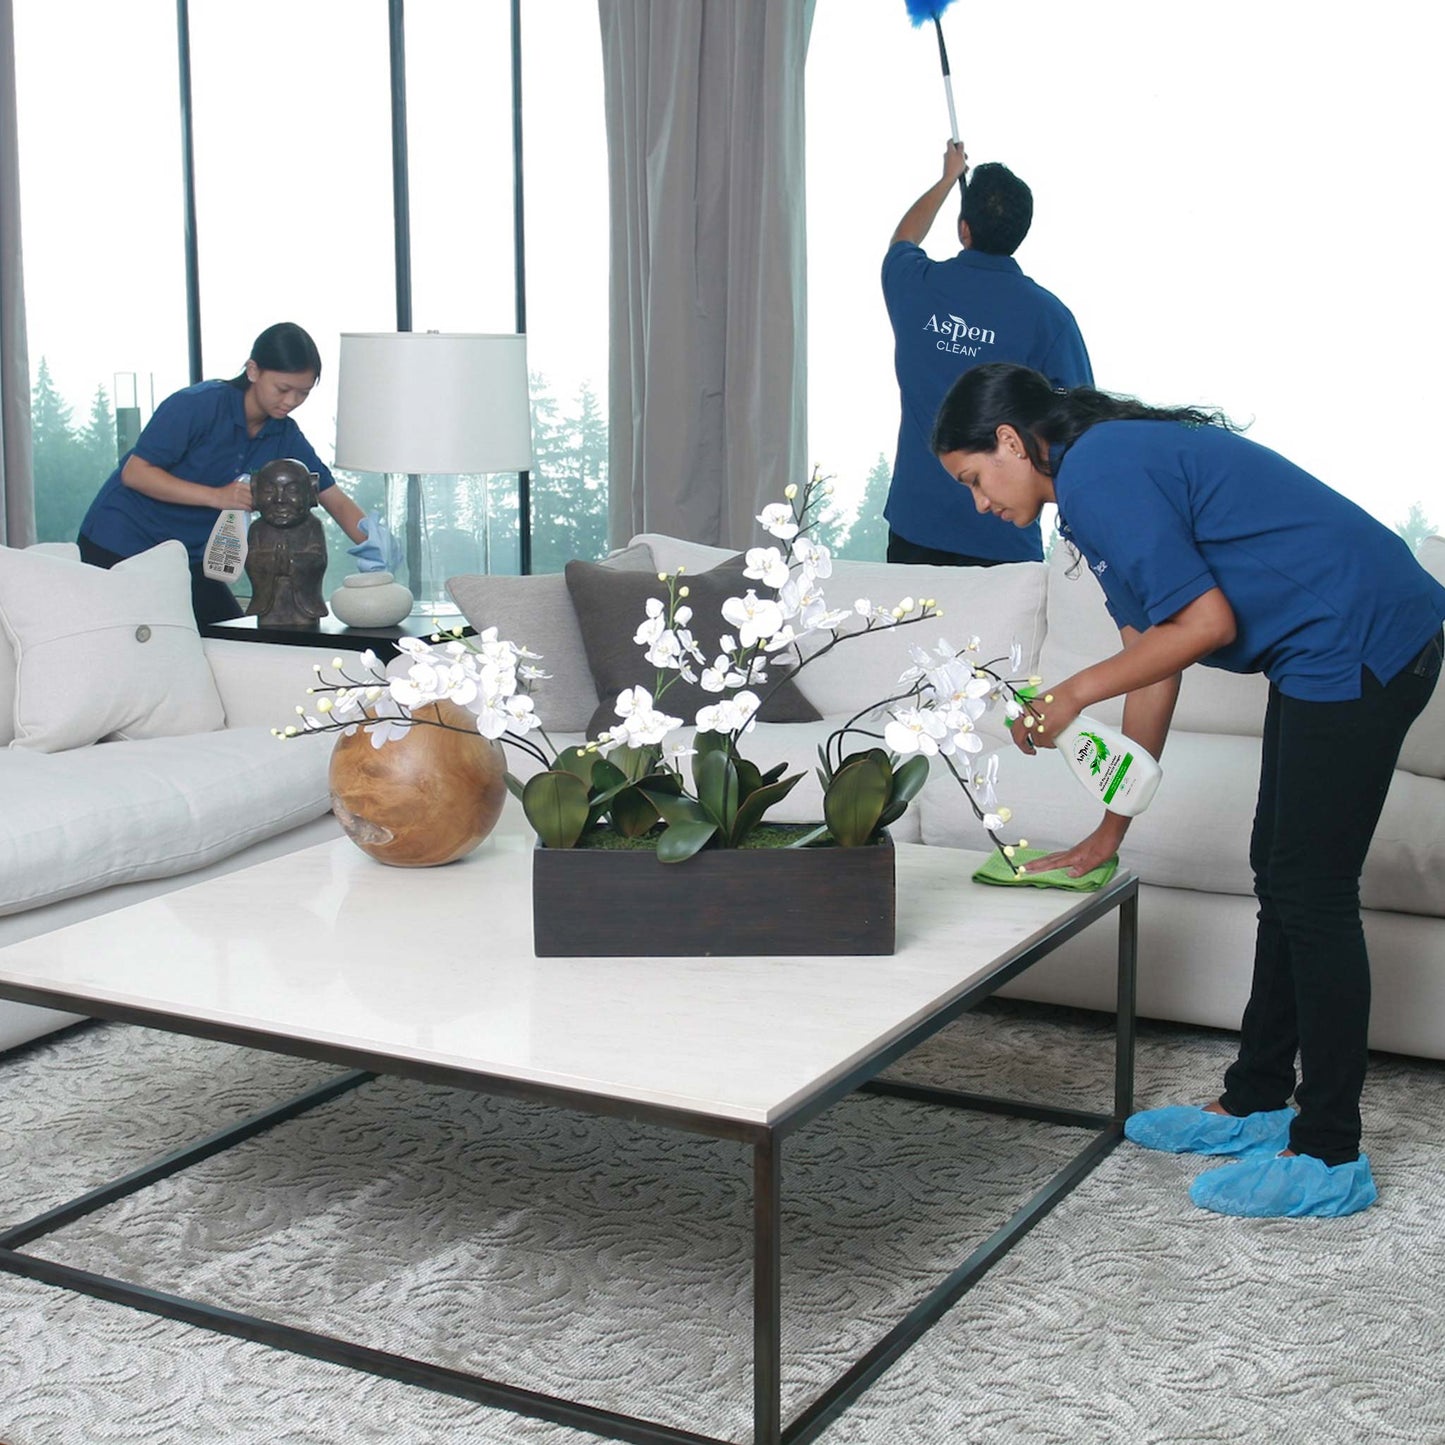 Professional cleaners enjoying using green cleaning products made by AspenClean to clean a house